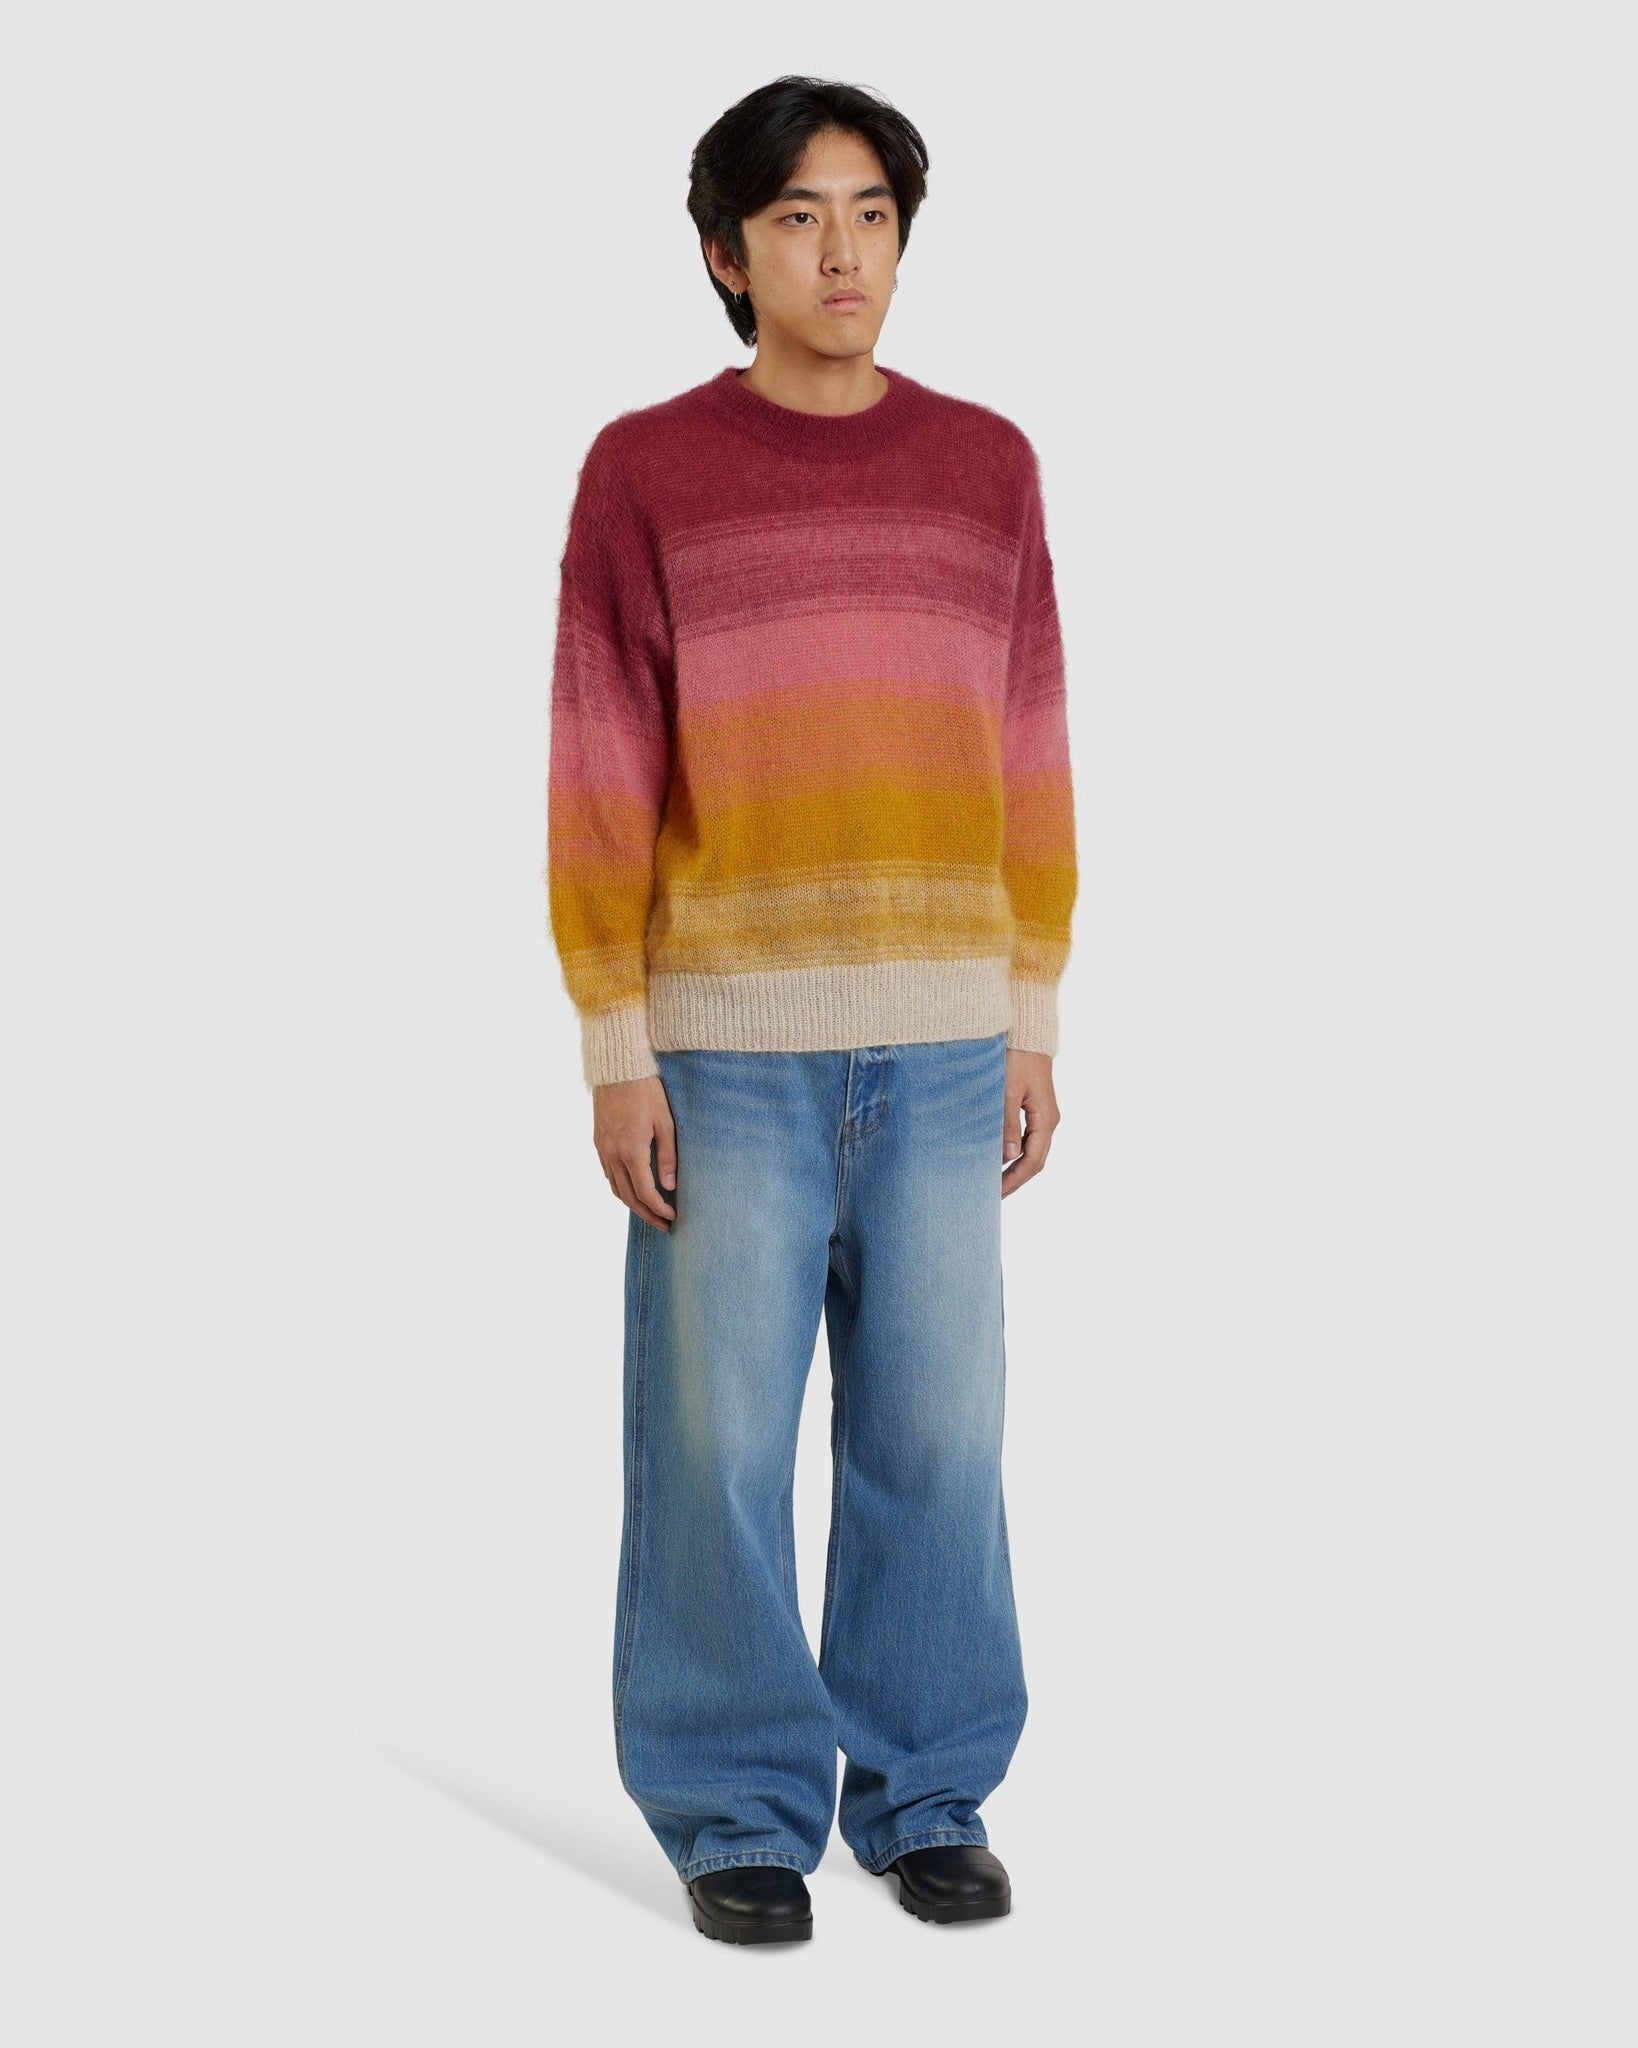 Drussellh Gradient Sweater Raspberry/Ocre - {{ collection.title }} - Chinatown Country Club 